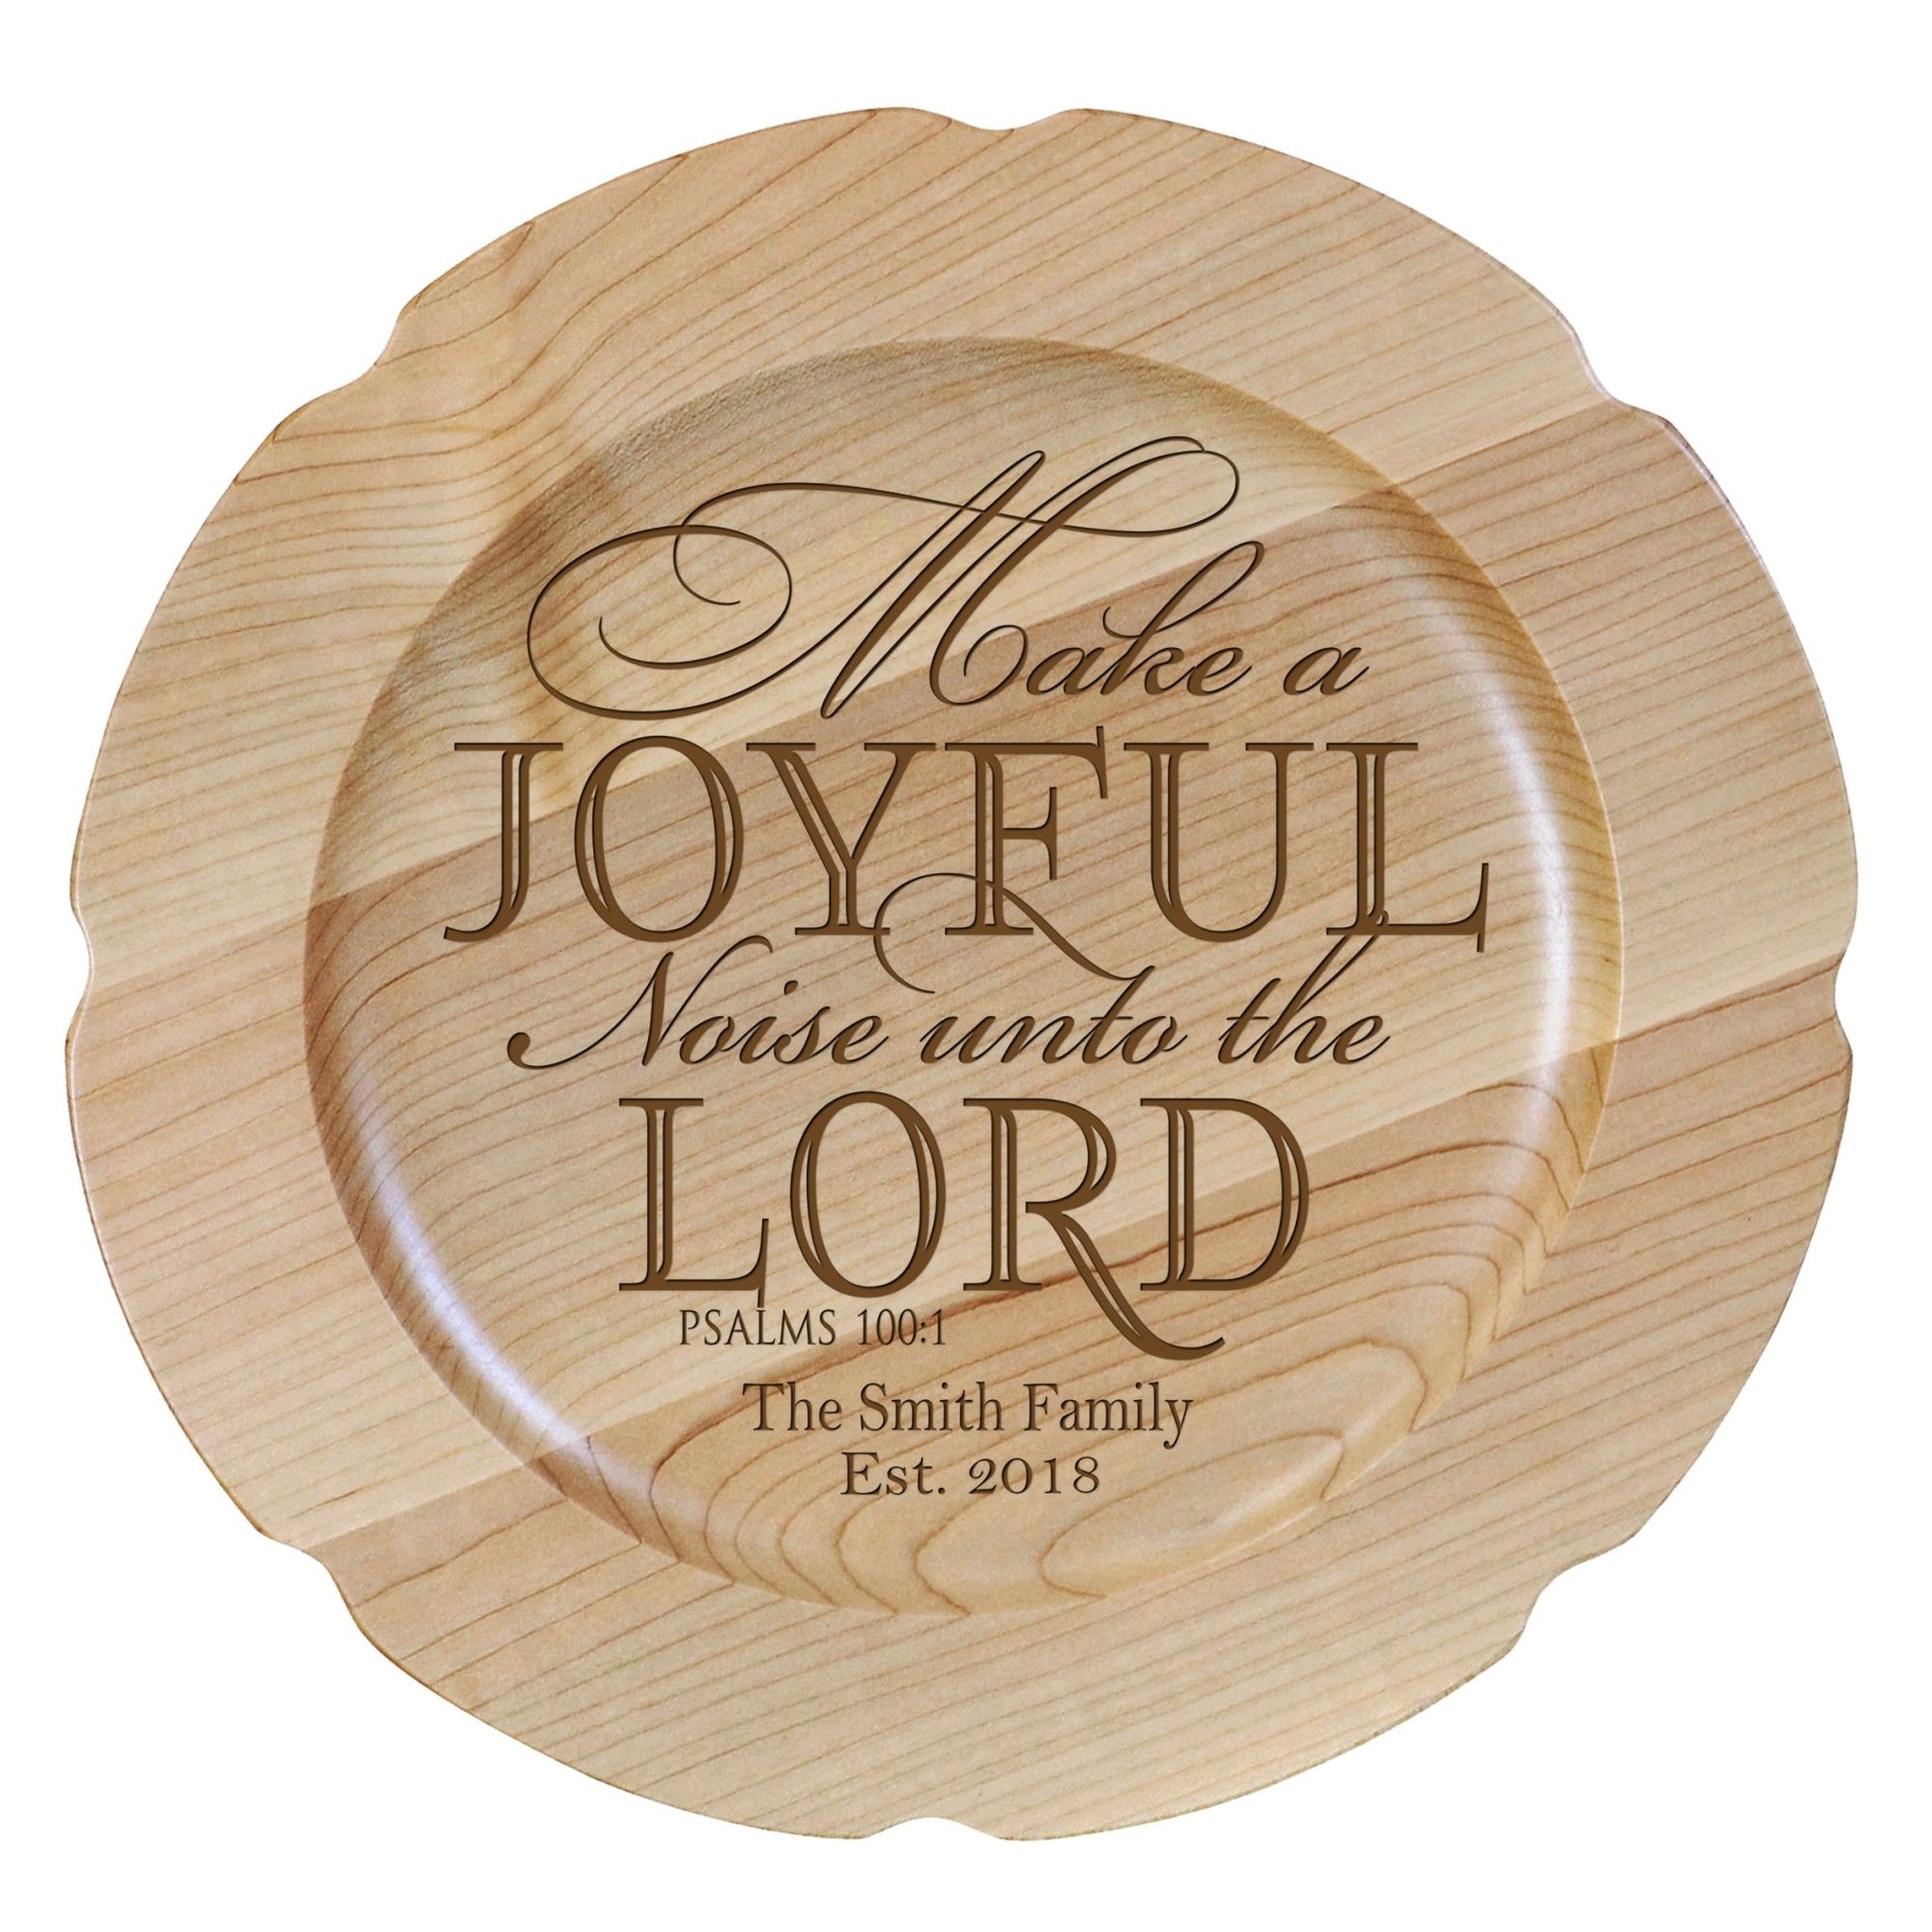 Personalized Inspirational Plates With Quotes - Make A Joyful Noise - LifeSong Milestones